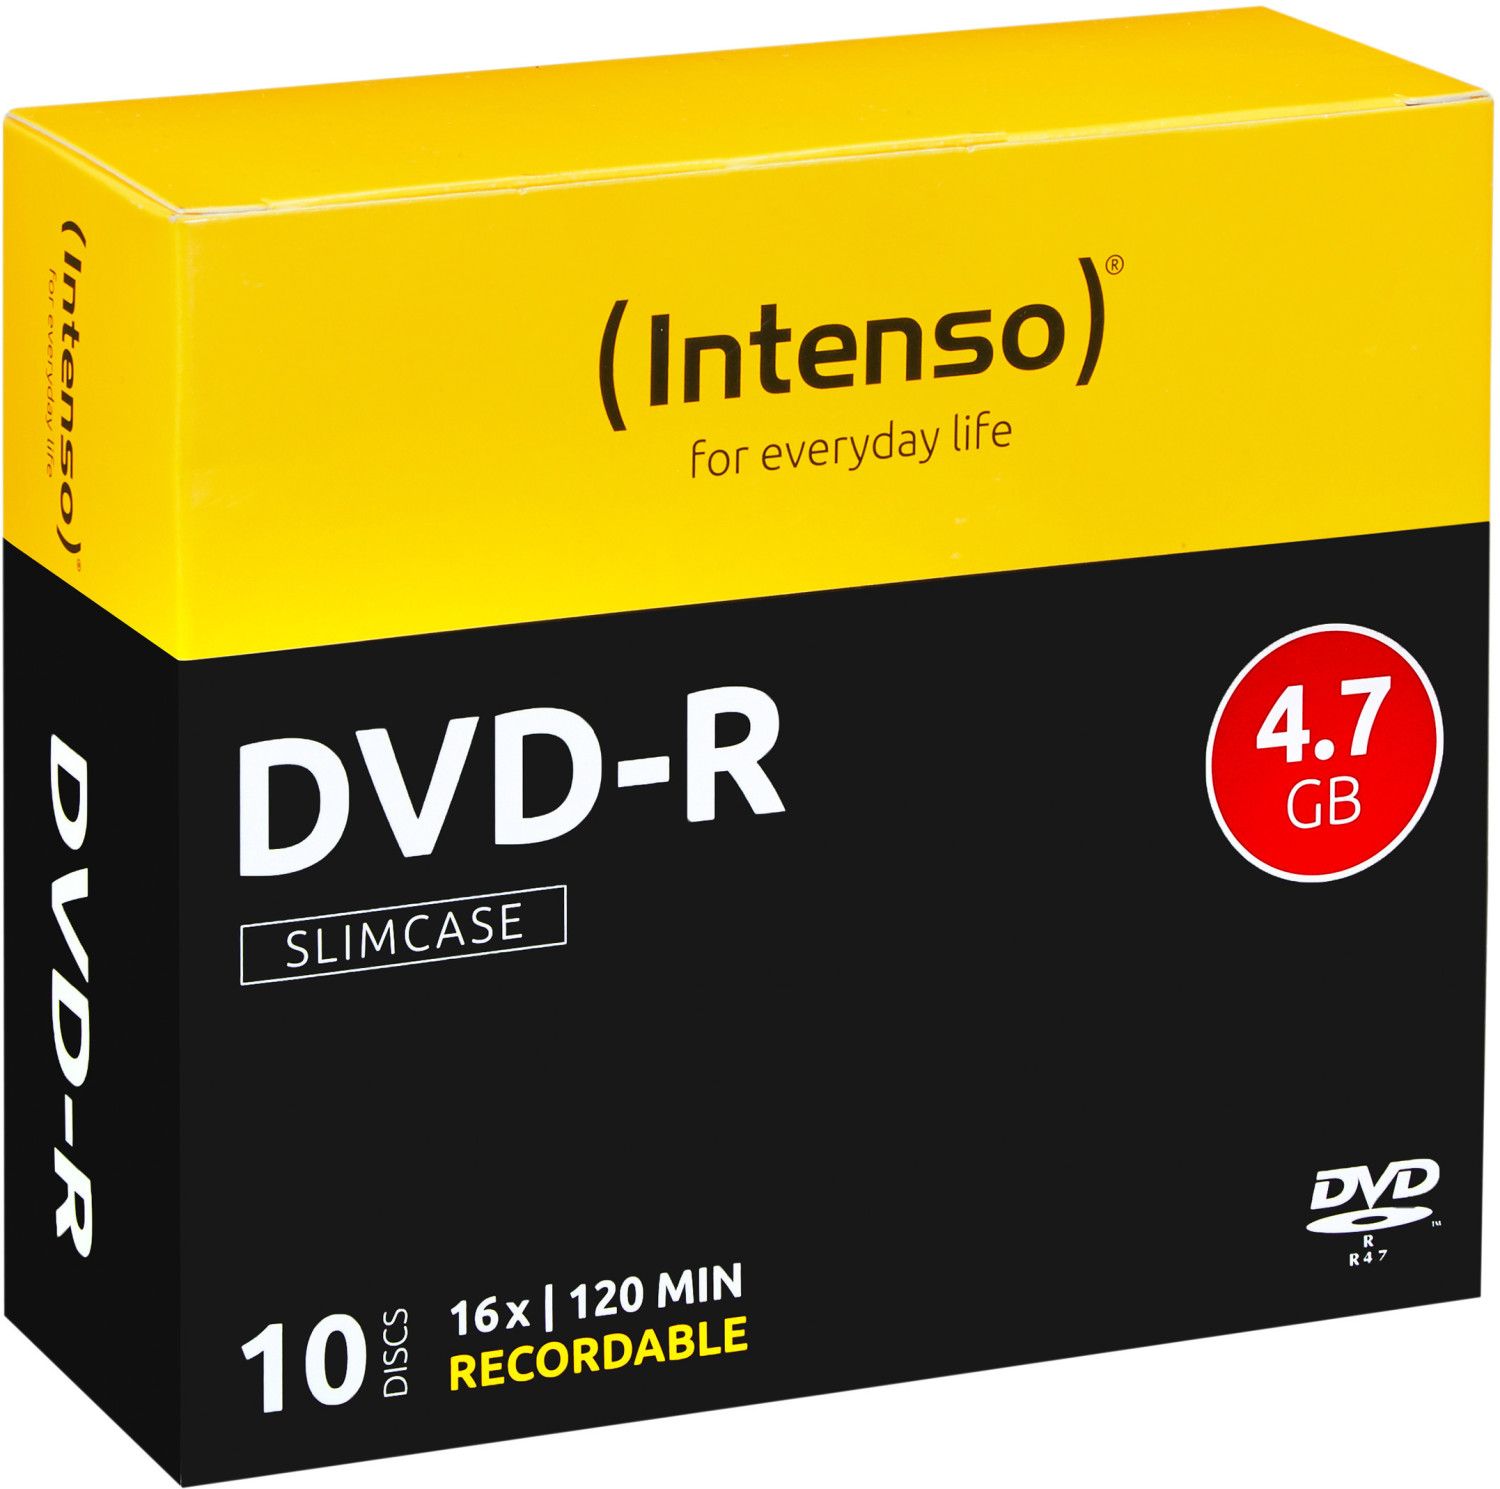 Photos - Other for Computer Intenso DVD-R 4,7GB 120min 16x 10pk Slim Case 